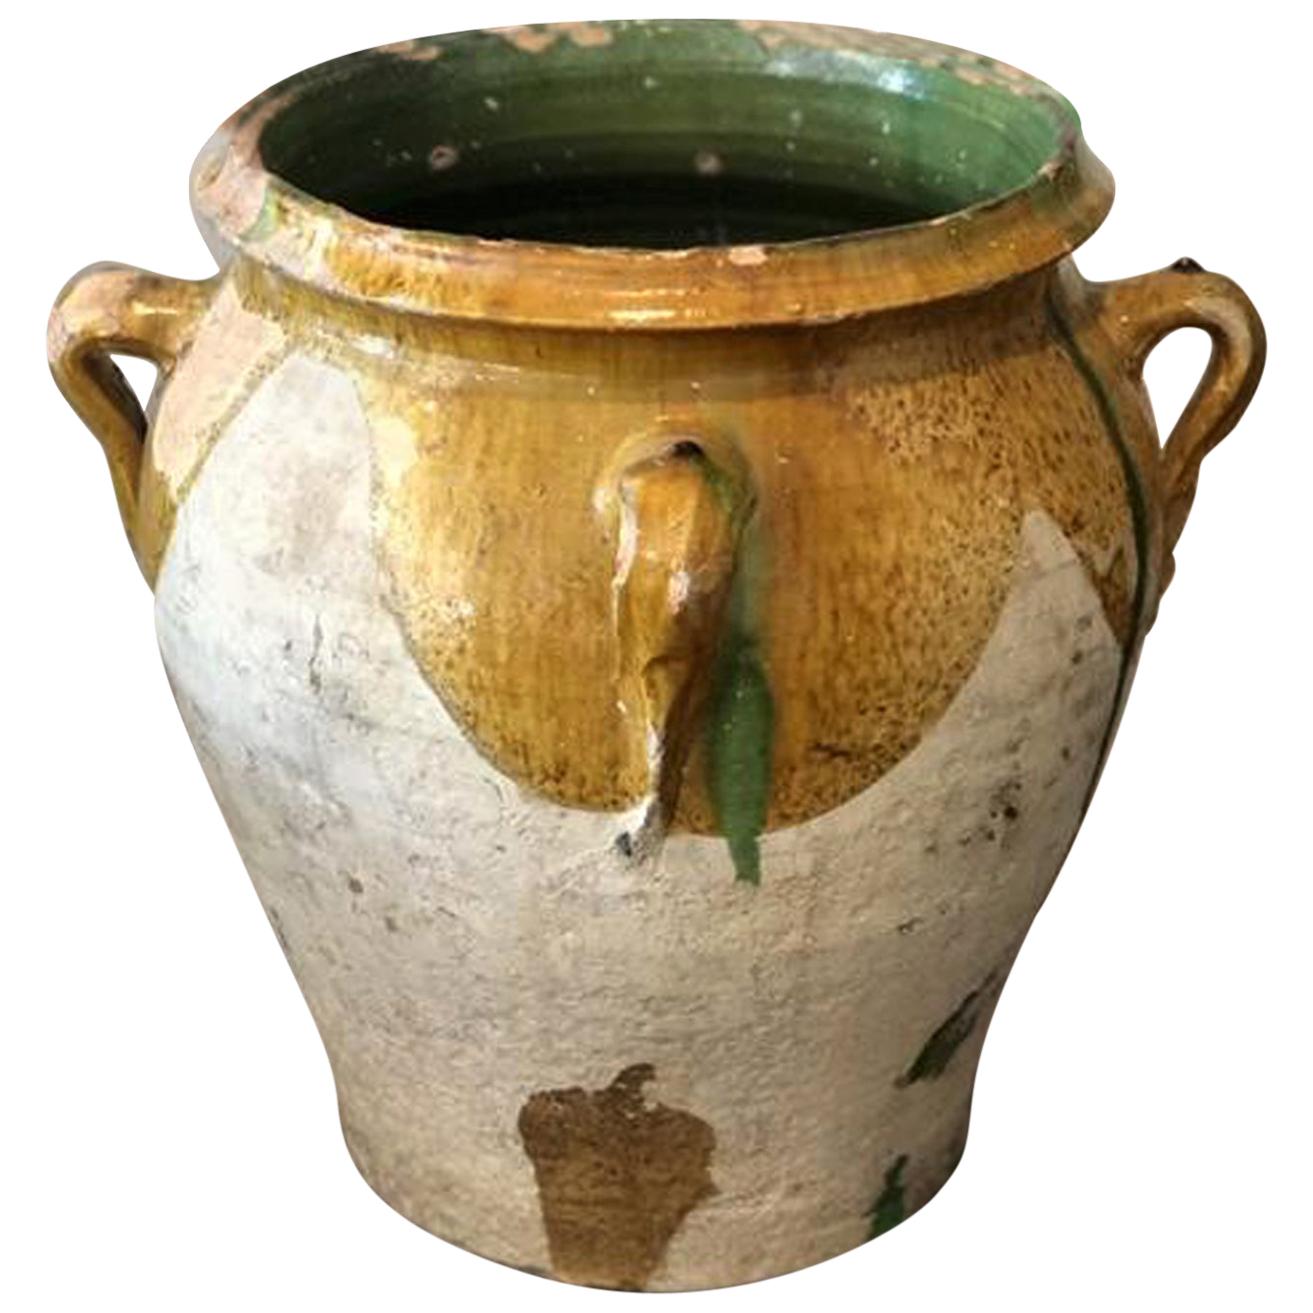 19th Century Large French Glazed Yellow & Green Terracotta Pot/ Urn with Handles